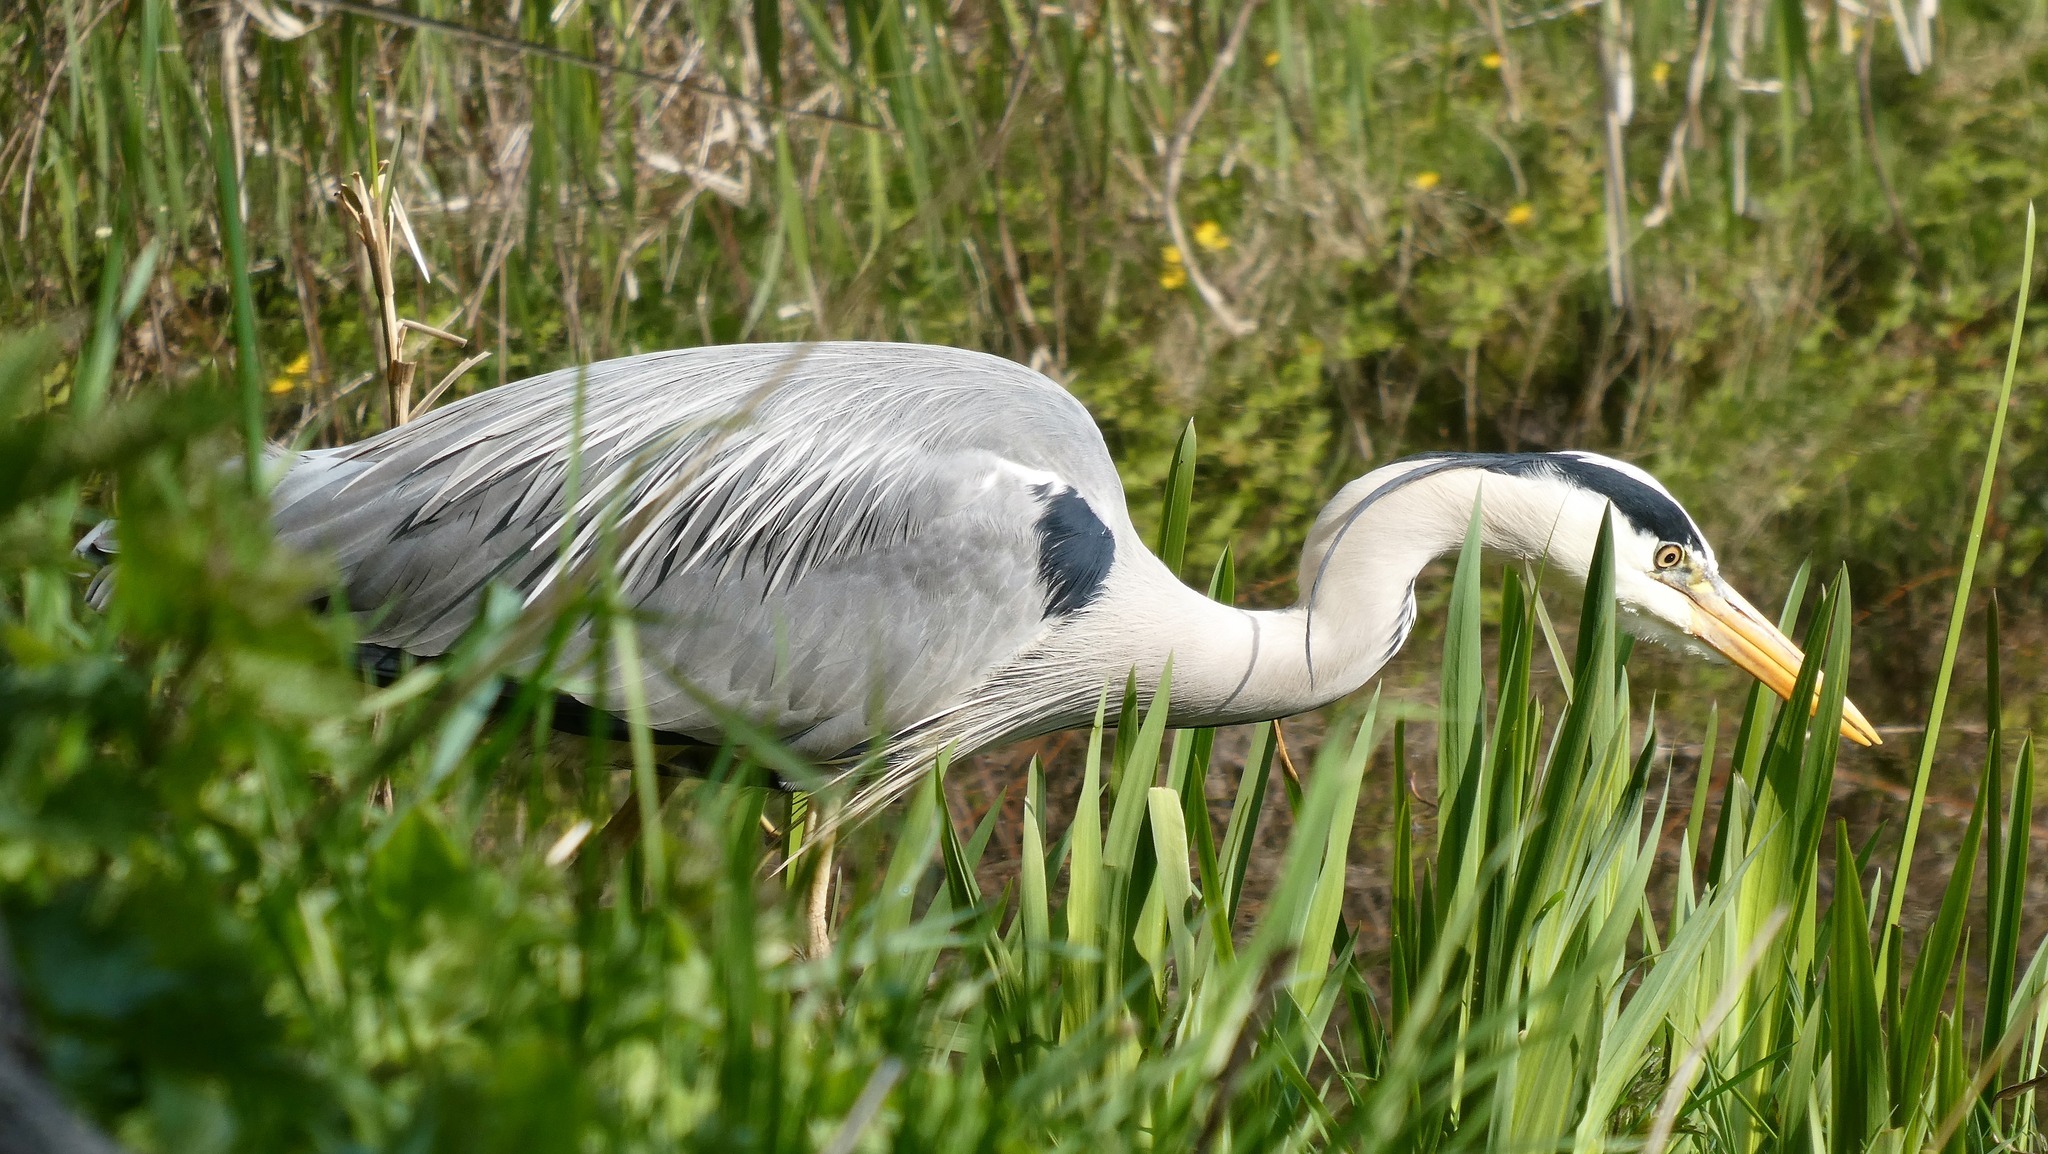 A heron at Anderton Nature Park by Lynne Bentley